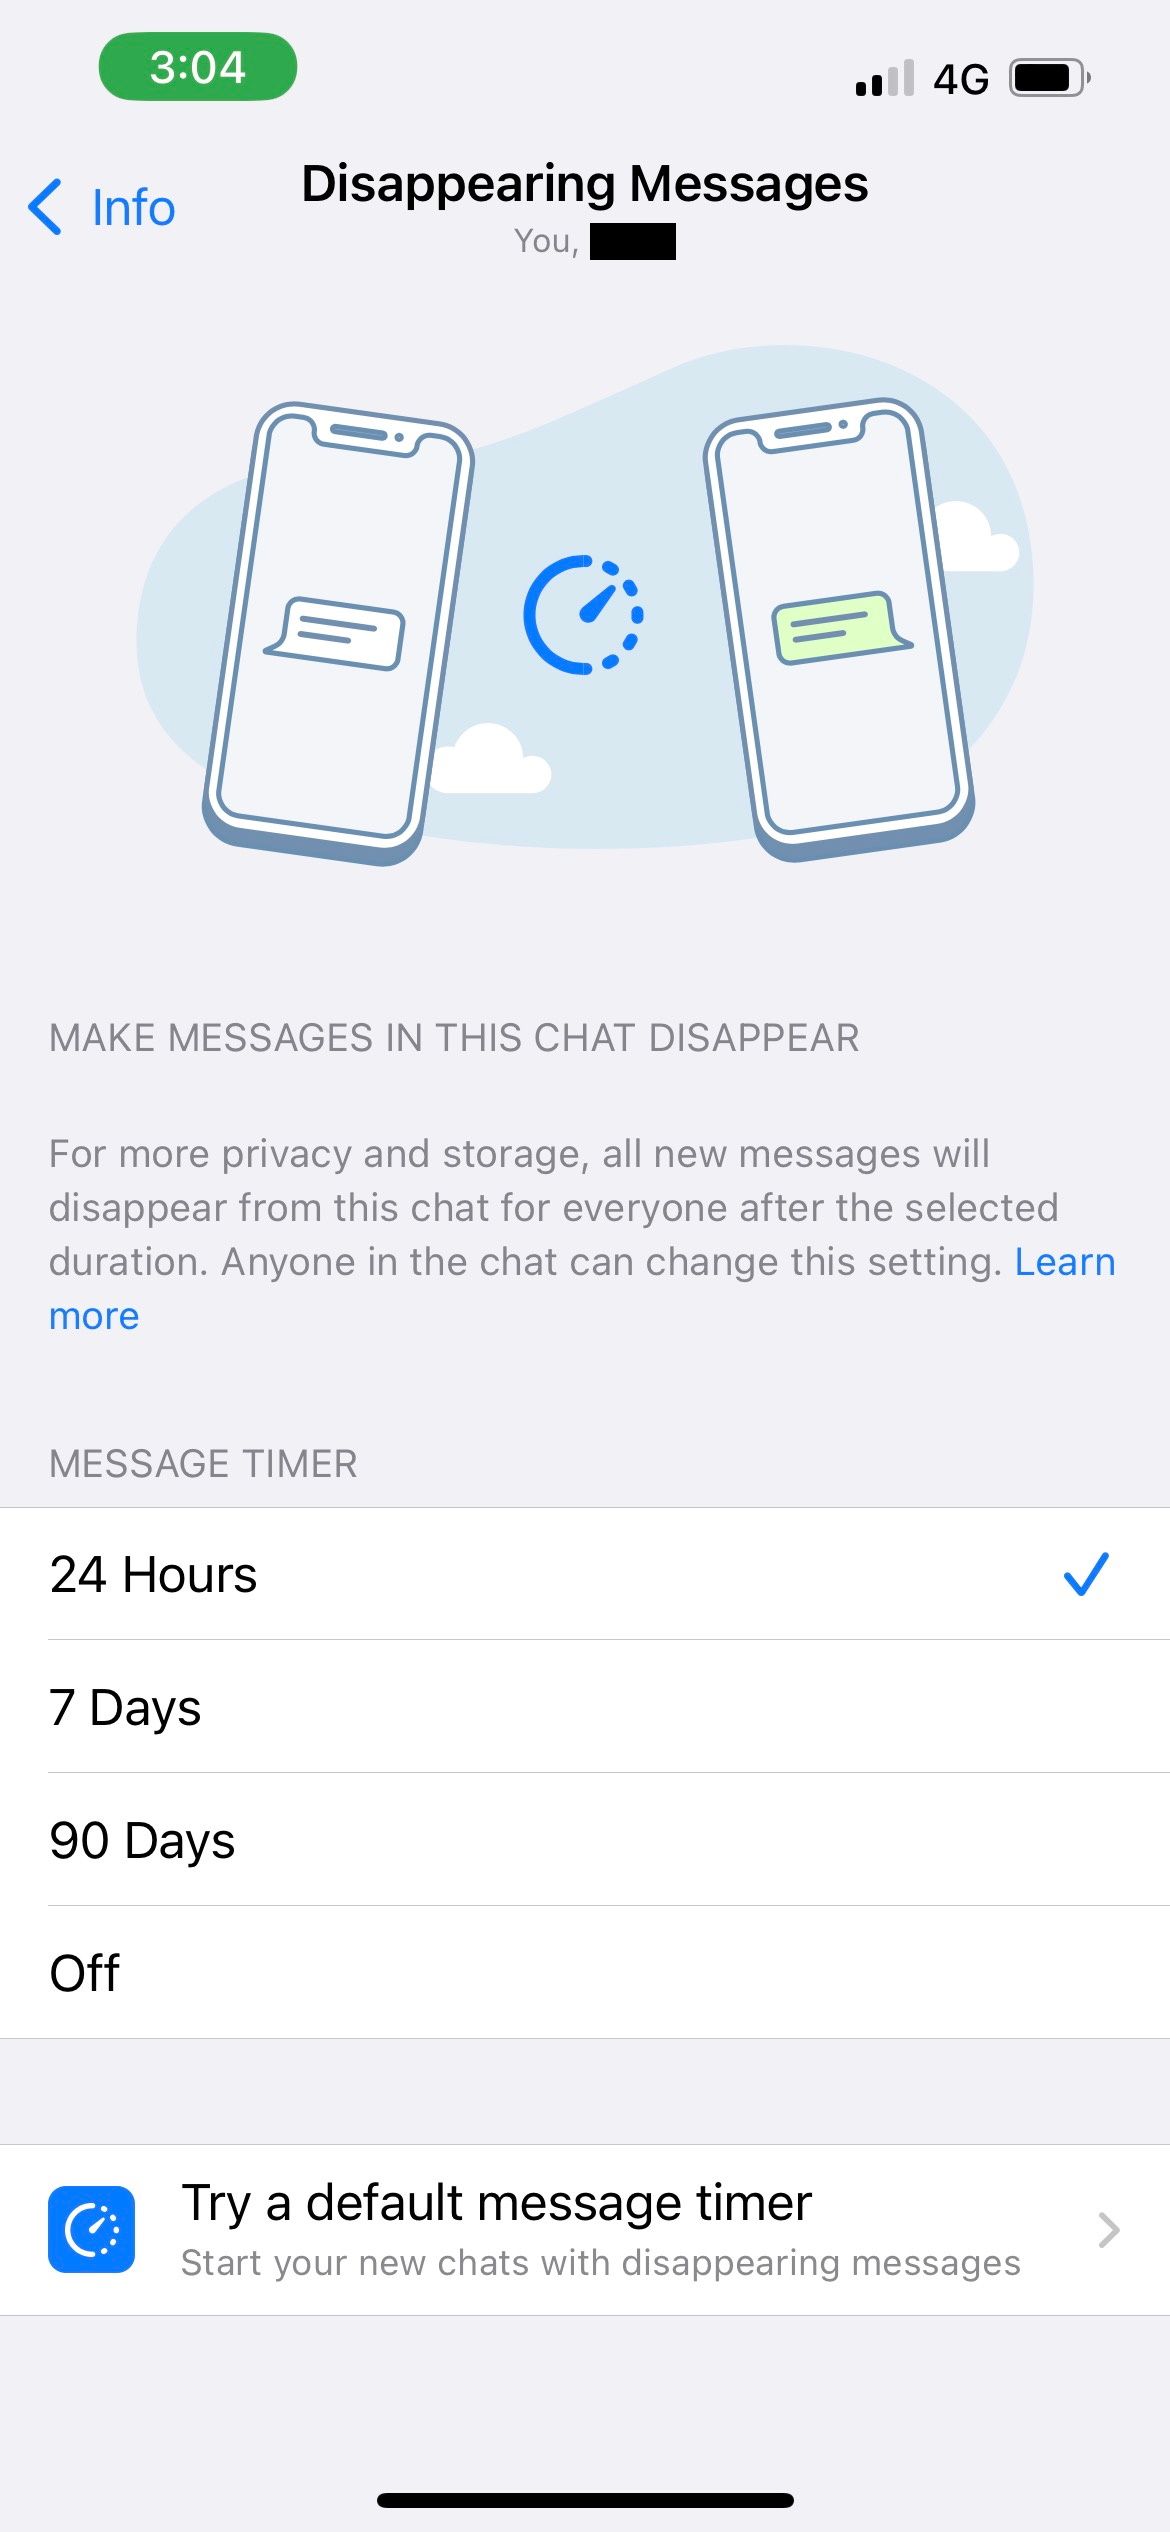 whatsapp disappearing messages time